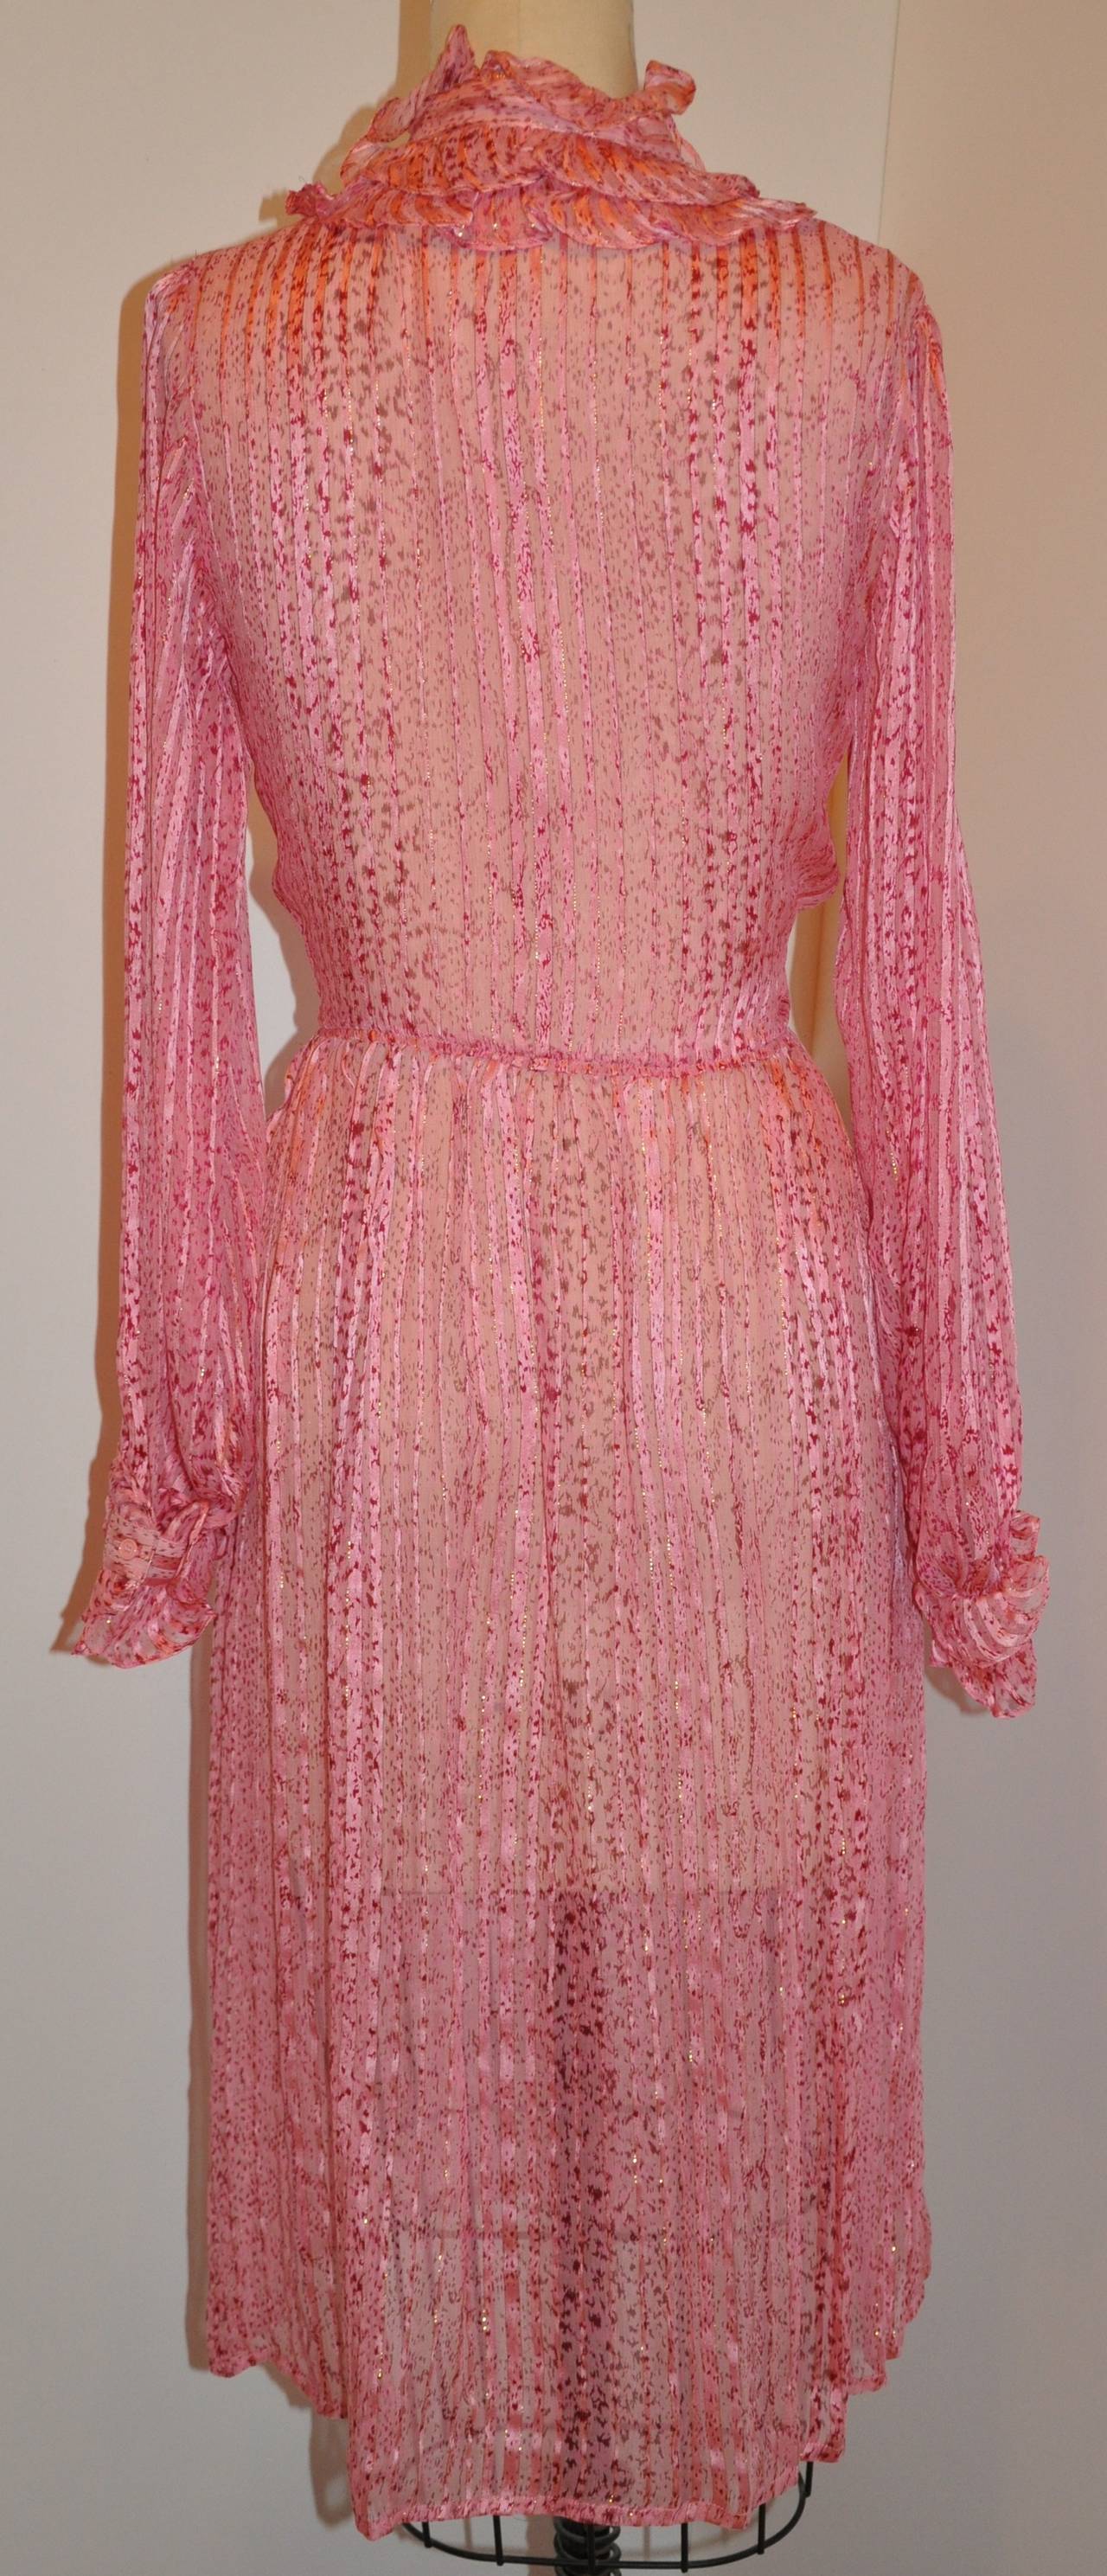 Saks Fifth Avenue shades of rose, red and pink silk with silk chiffon stripe ruffle dress has a center-front slit on the front which measures 8